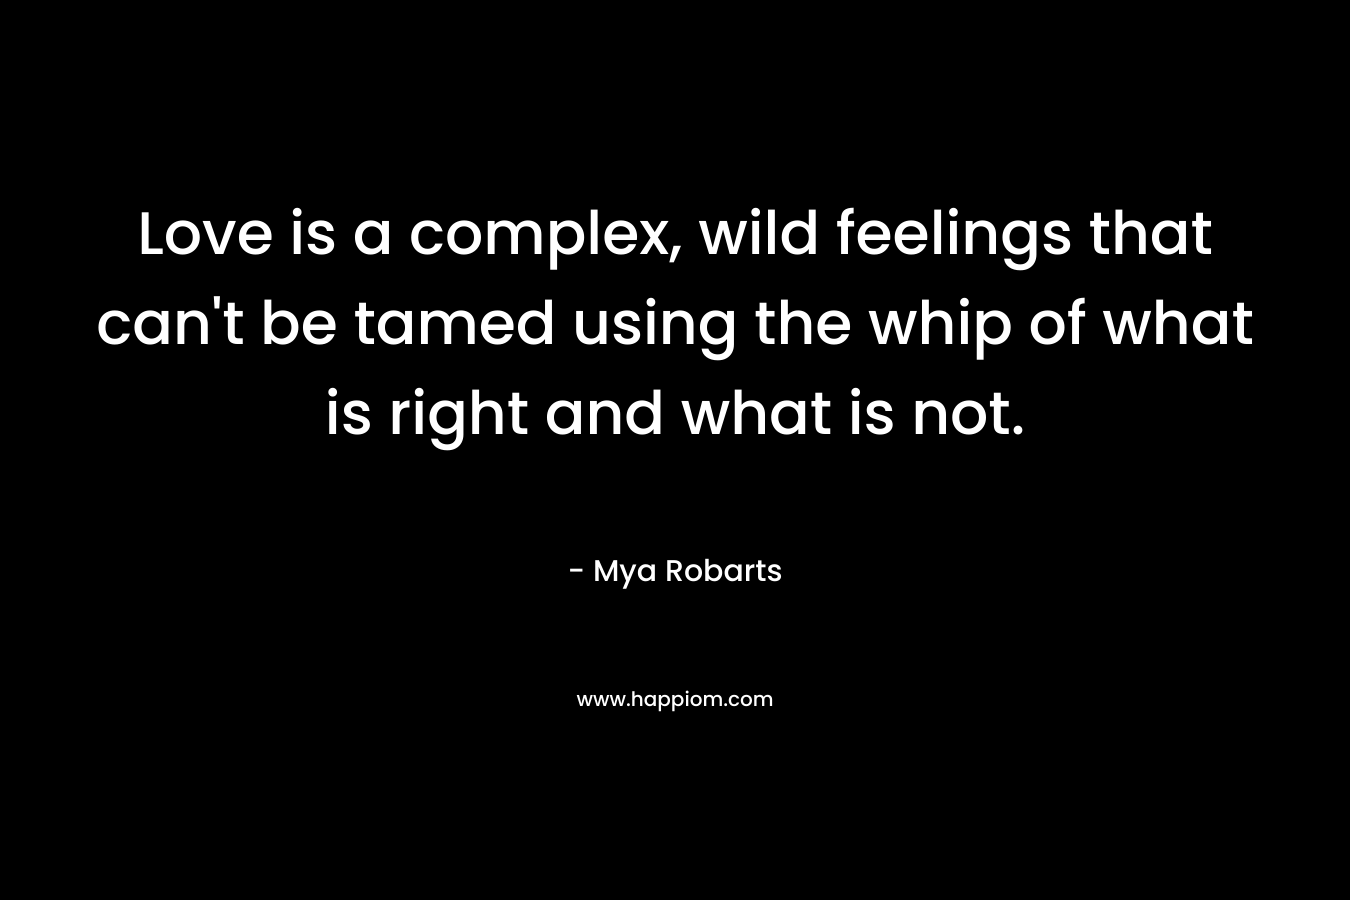 Love is a complex, wild feelings that can’t be tamed using the whip of what is right and what is not. – Mya Robarts